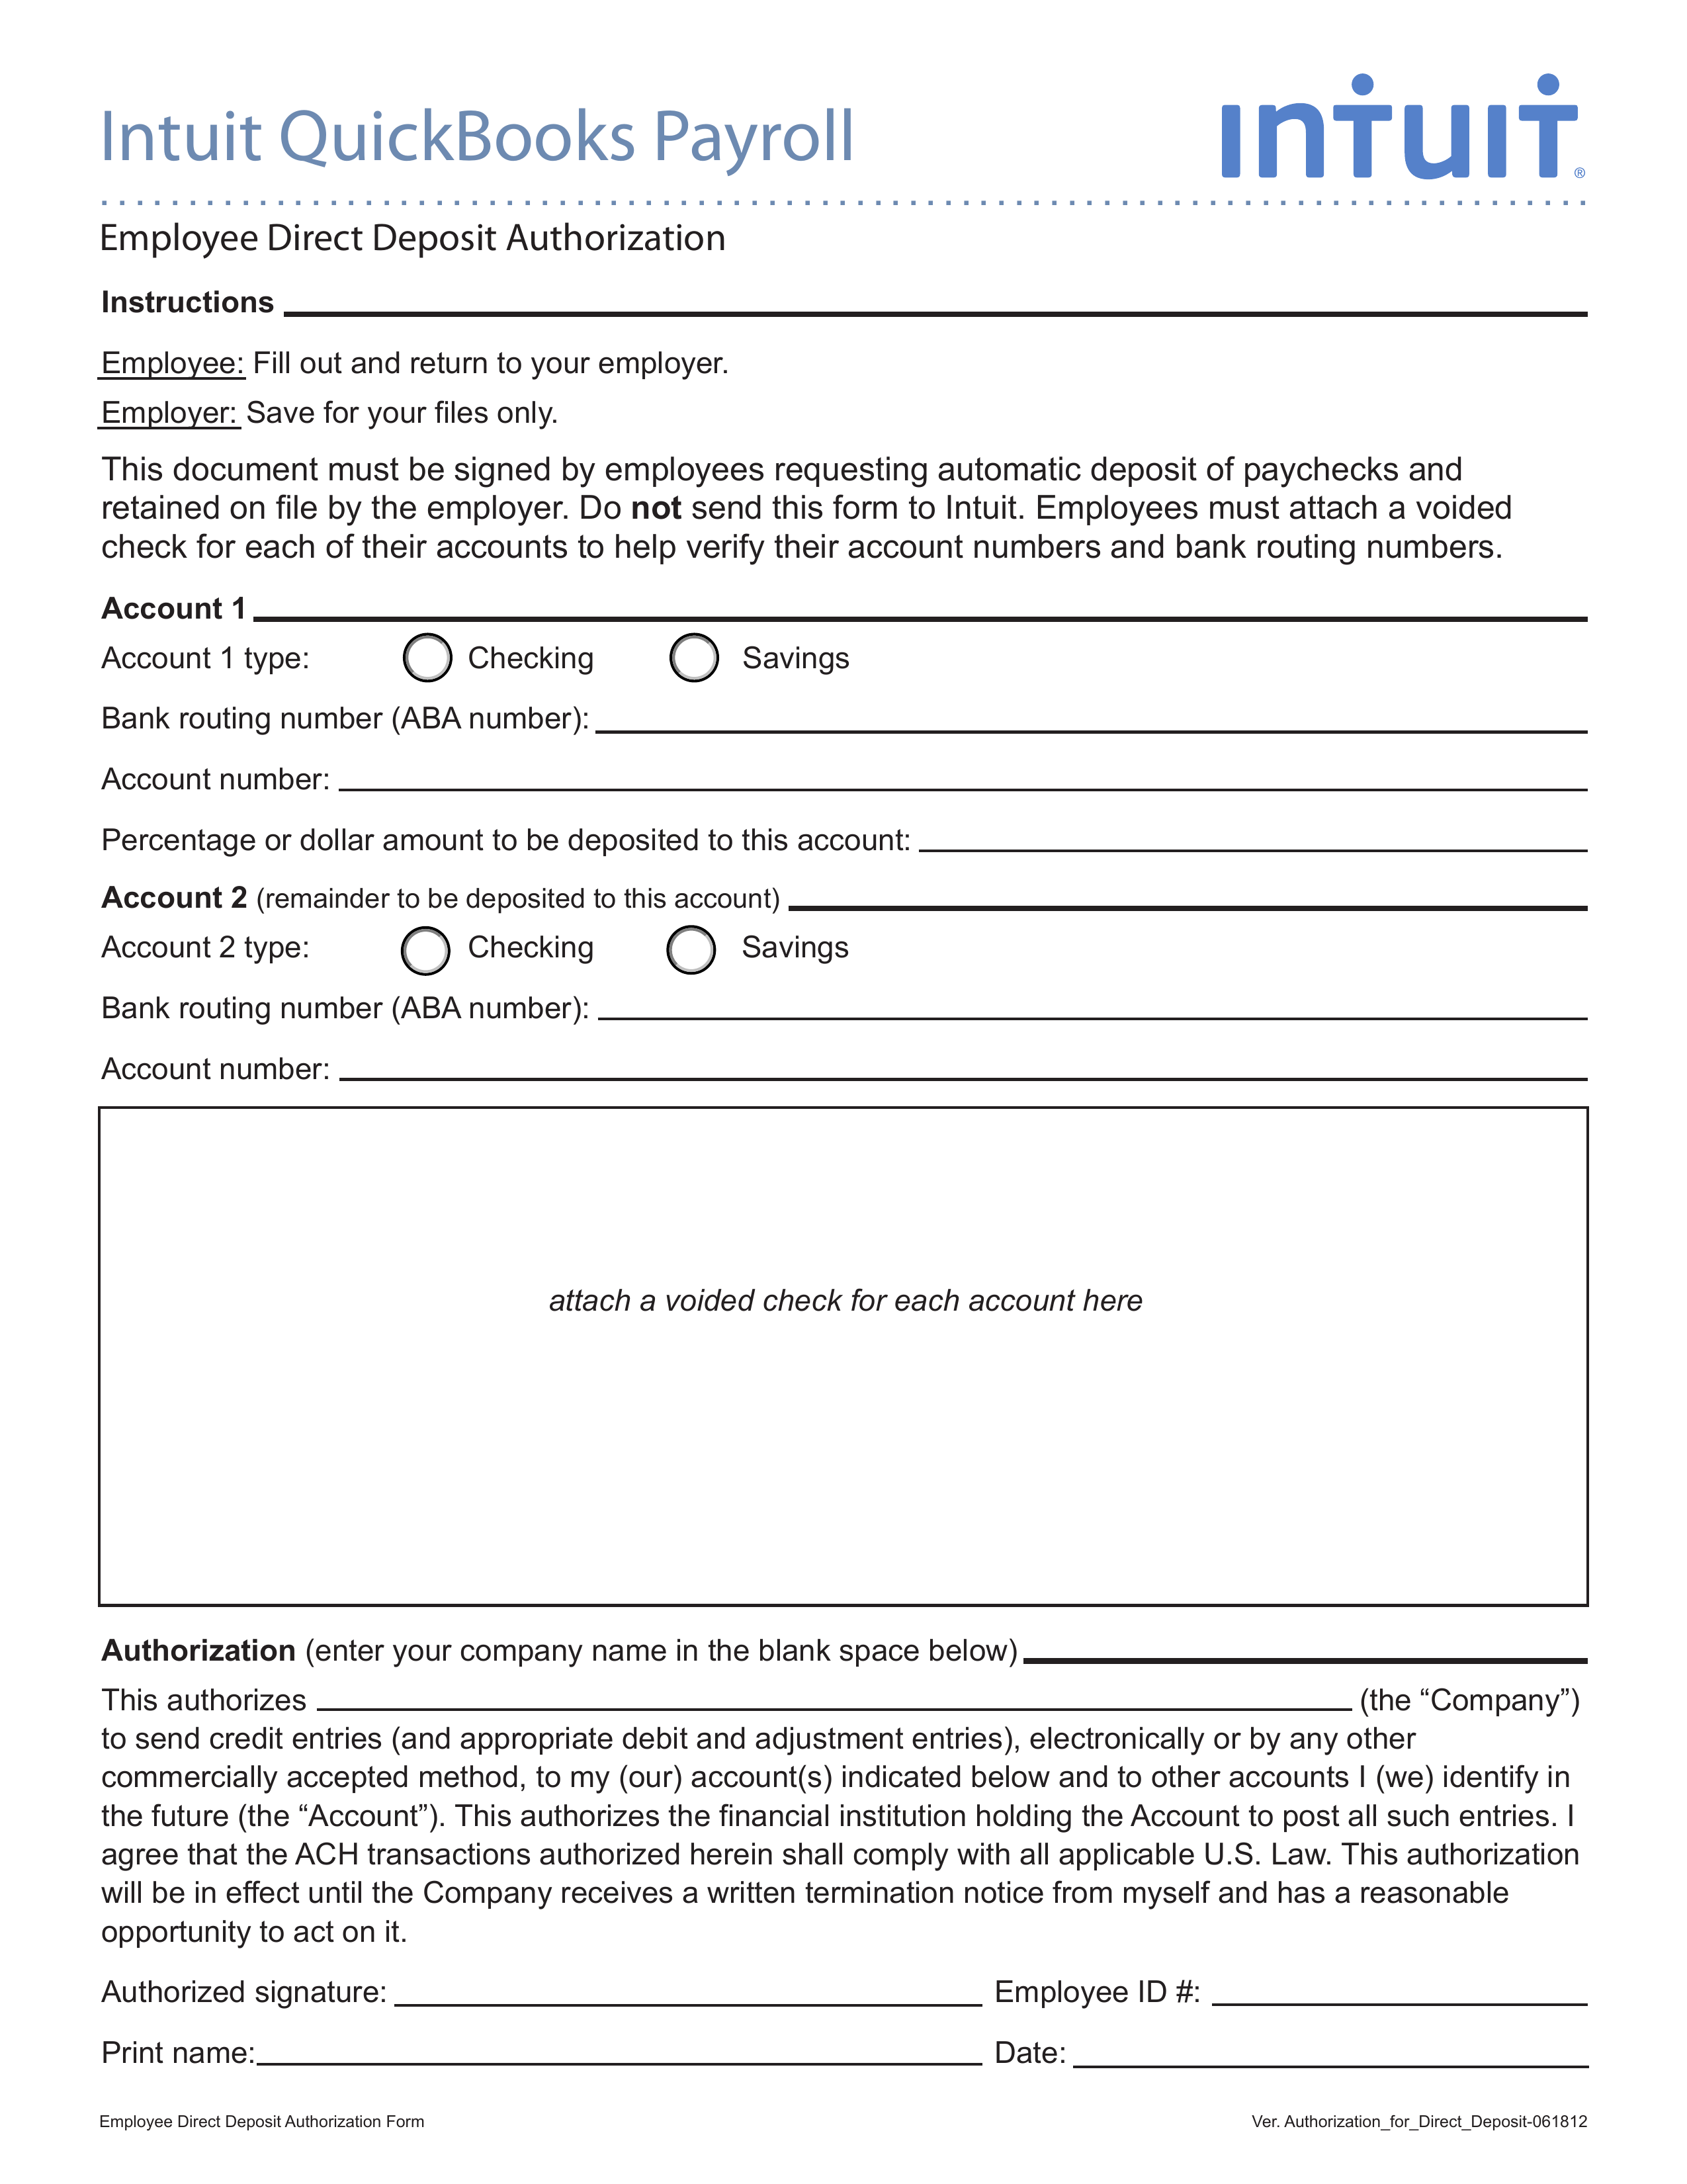 Free Intuit/Quickbooks Payroll Direct Deposit Form – PDF – EForms Within Payroll Direct Deposit Authorization Form Template